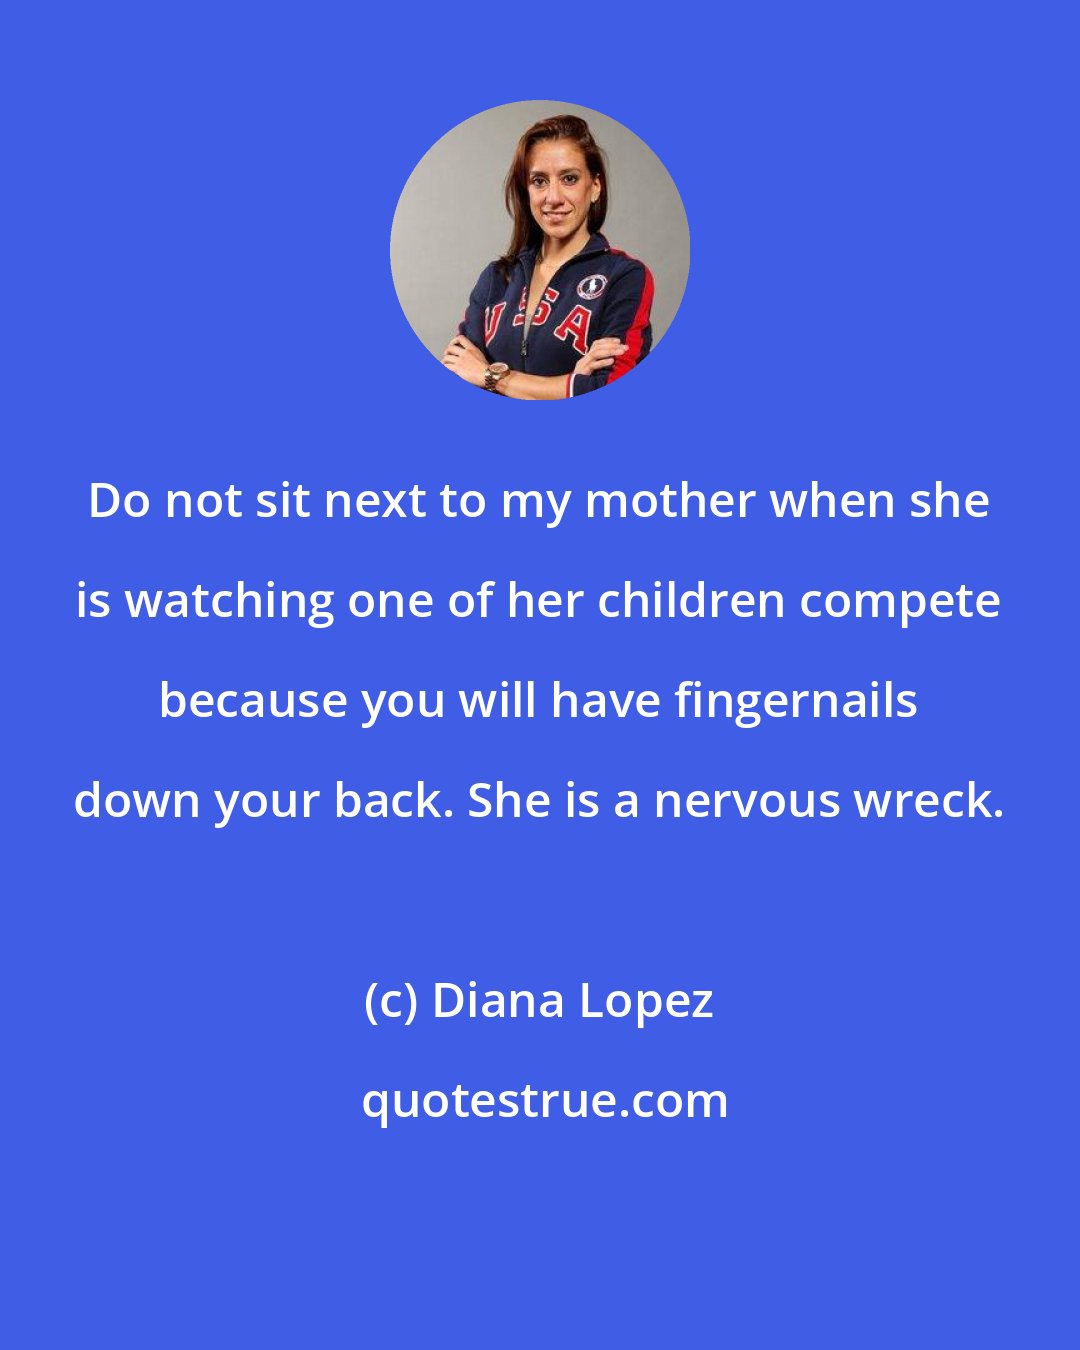 Diana Lopez: Do not sit next to my mother when she is watching one of her children compete because you will have fingernails down your back. She is a nervous wreck.